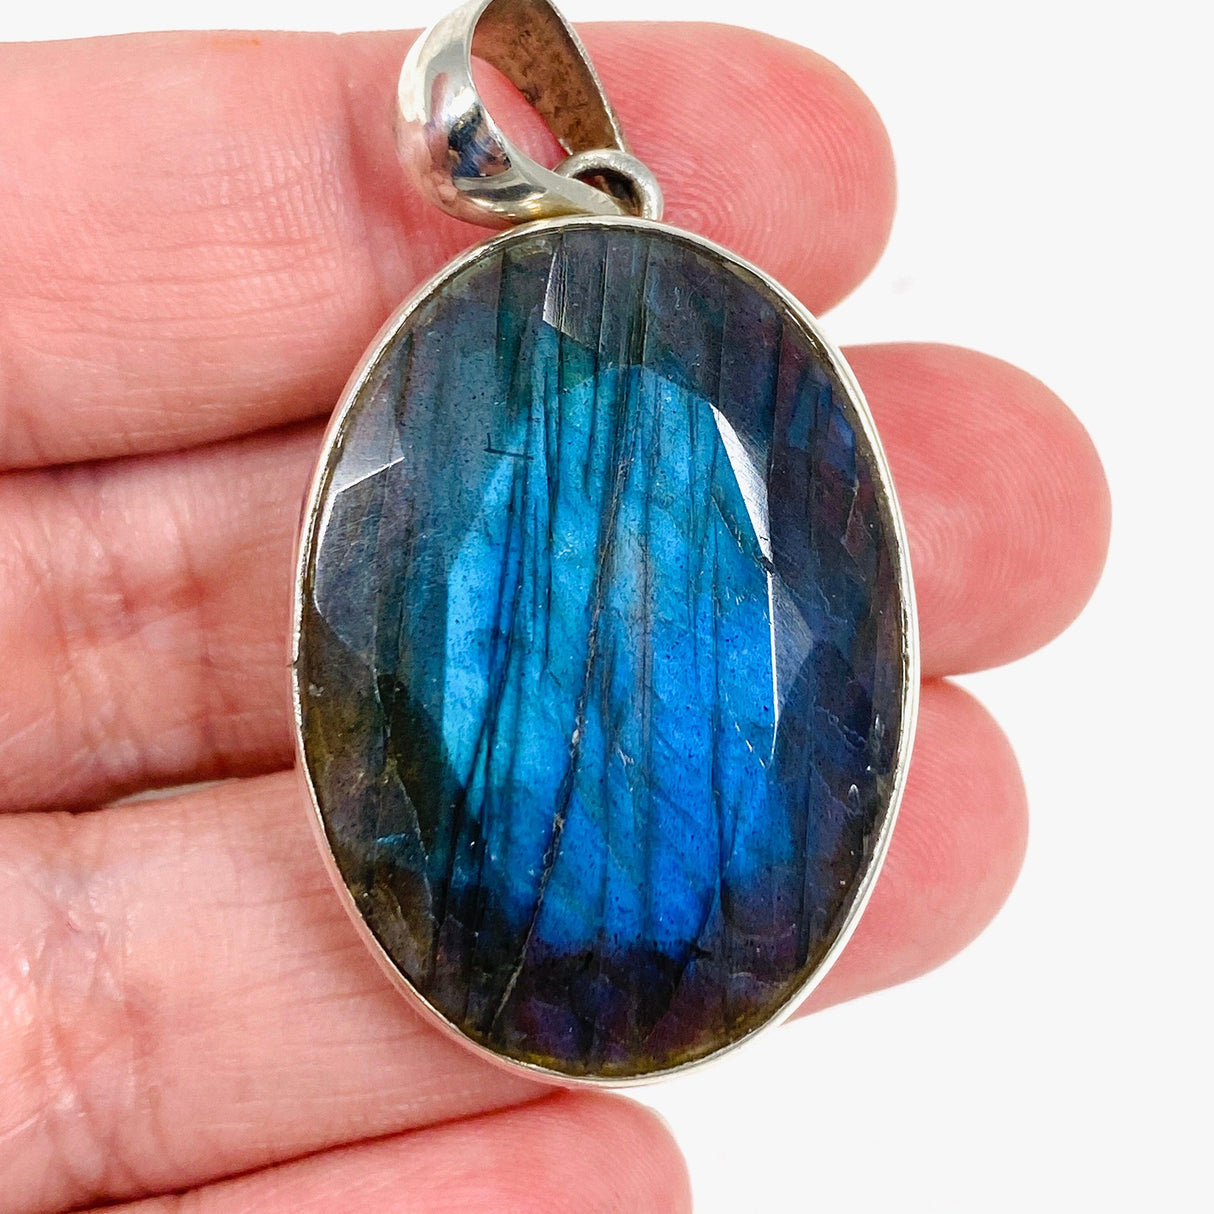 Blue iridescent Labradorite faceted gemstone and silver pendant in a handl